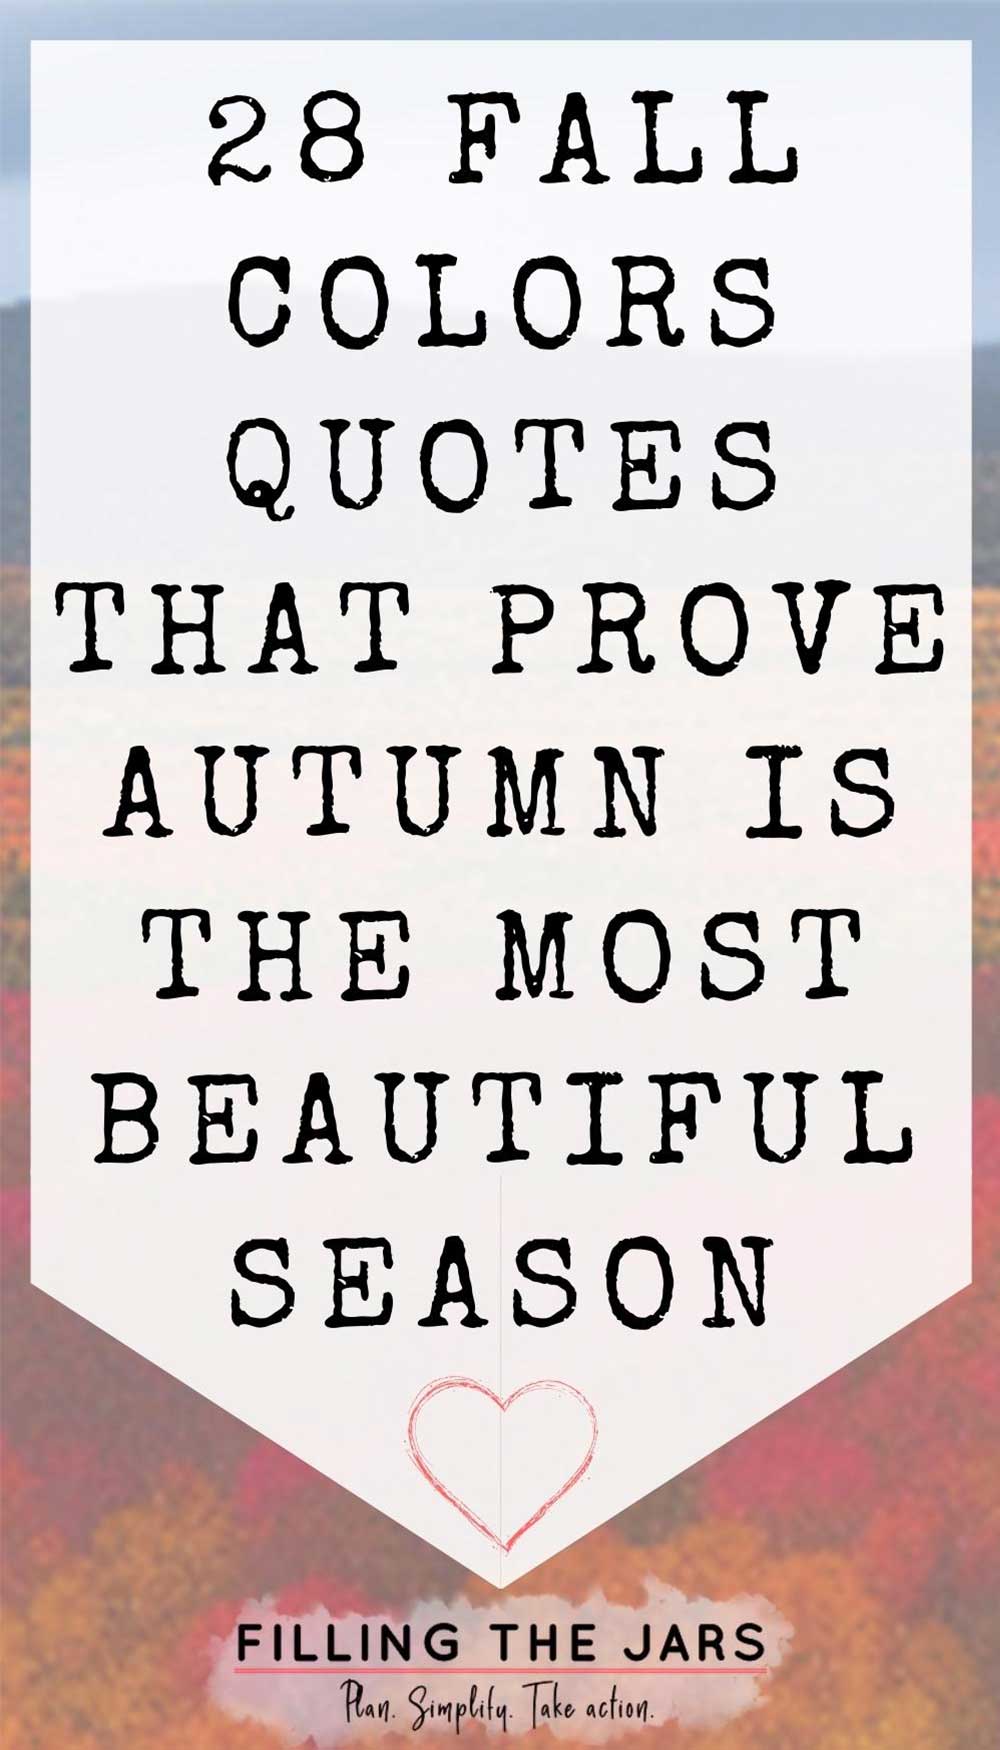 Text 28 fall colors quotes that prove autumn is the most beautiful season on white background over faded fall scenery.